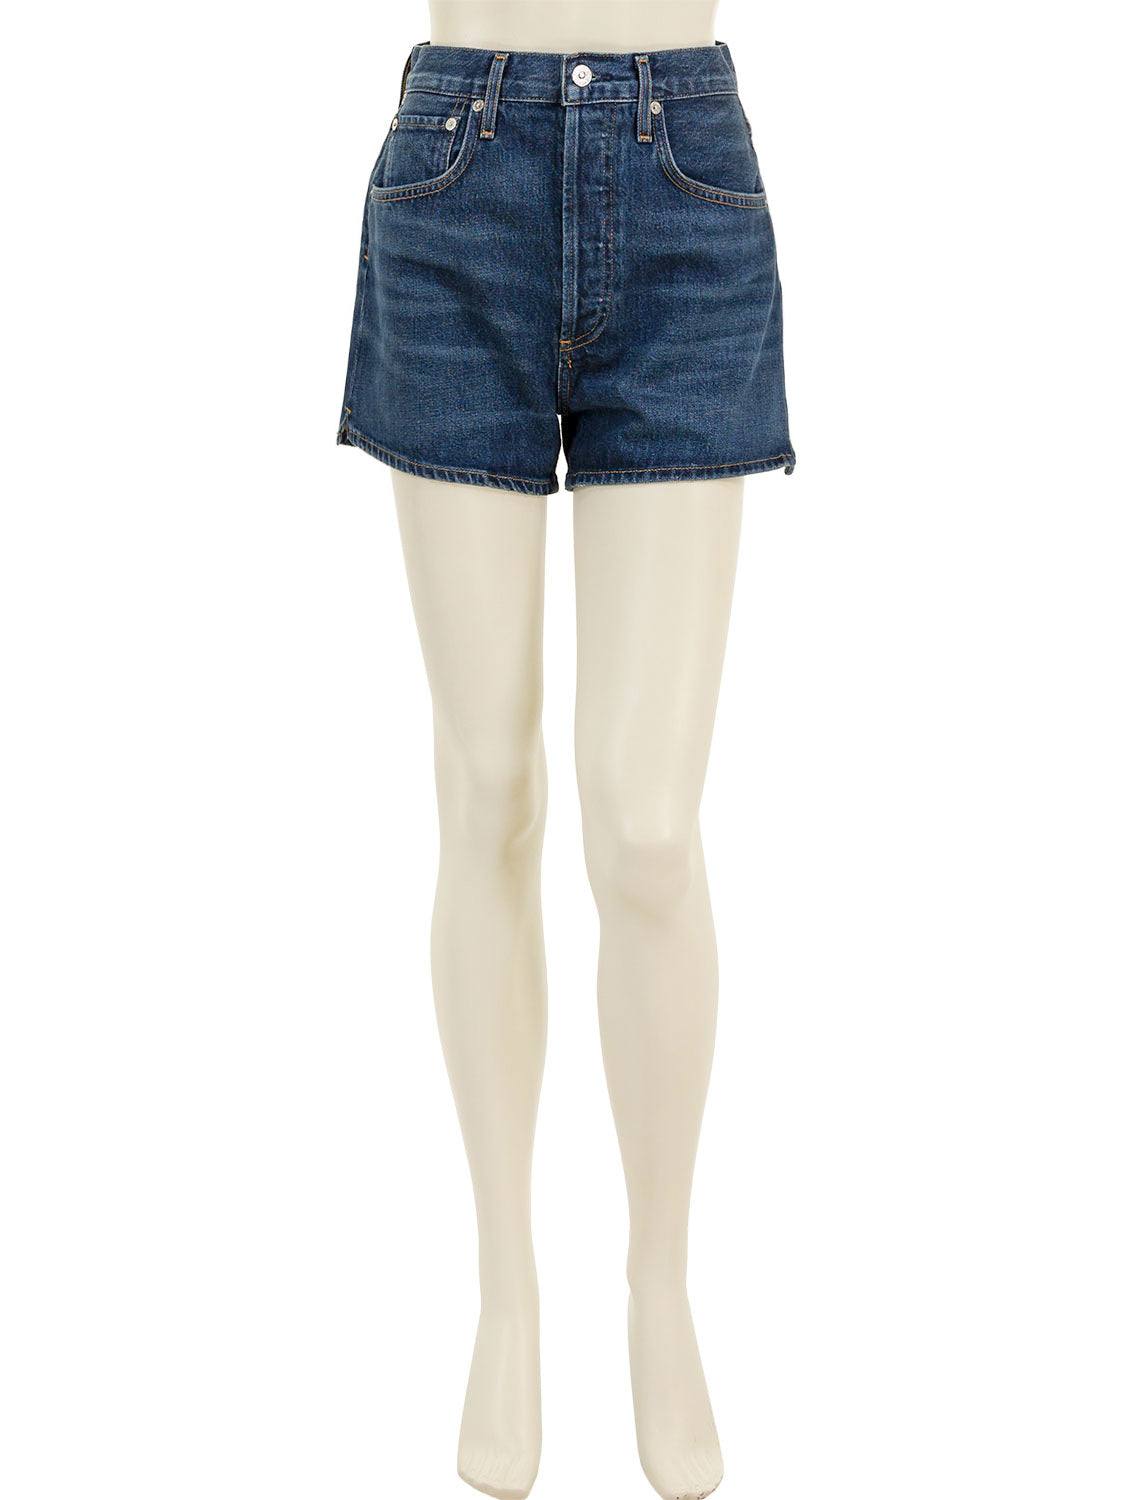 Amo Denim Loverboy Short in Strength | Relaxed fit jeans, Amo denim, Jeans  fit